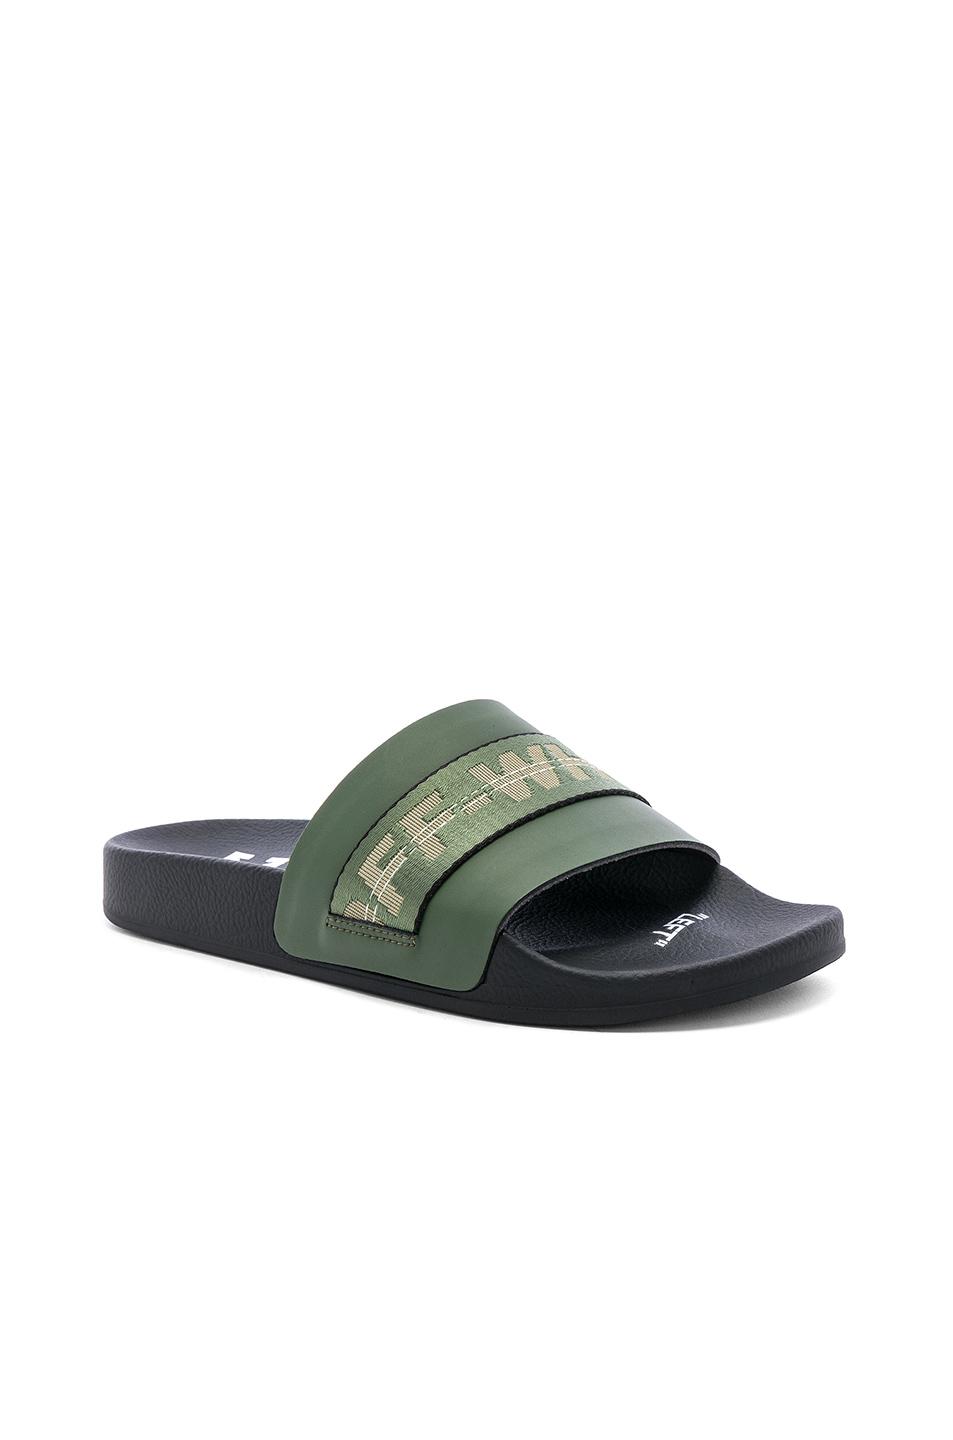 Off-White c/o Virgil Abloh Leather Industrial Slide in Army Green 